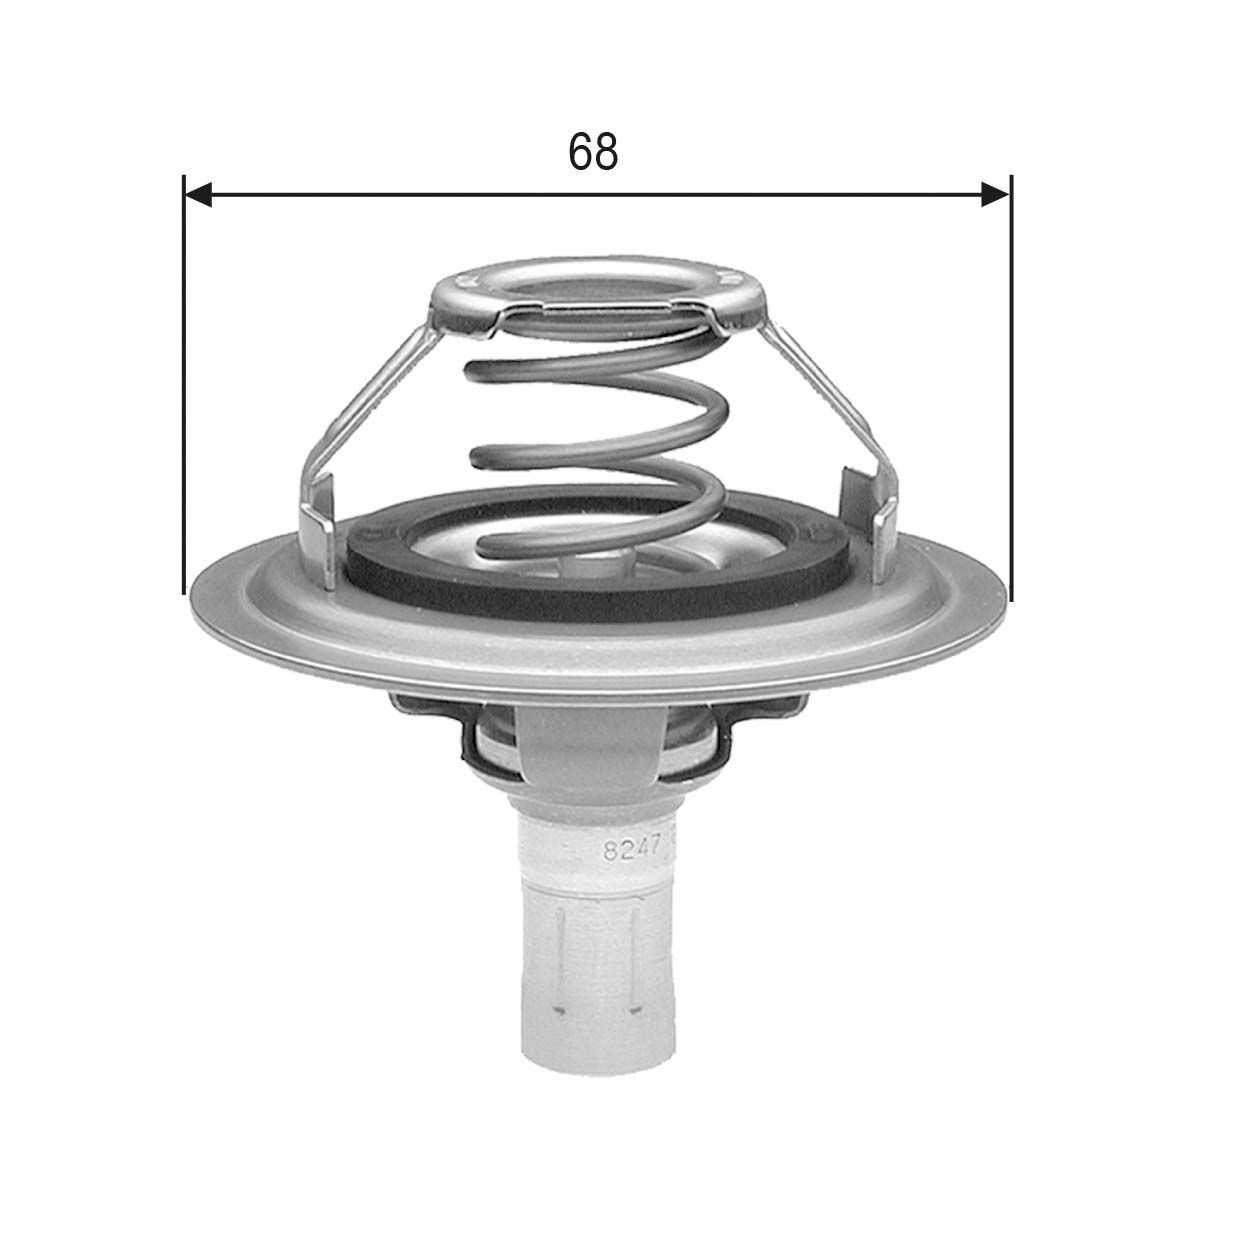 GATES TH23080G1 Engine thermostat Opening Temperature: 80°C, with gaskets/seals, without housing